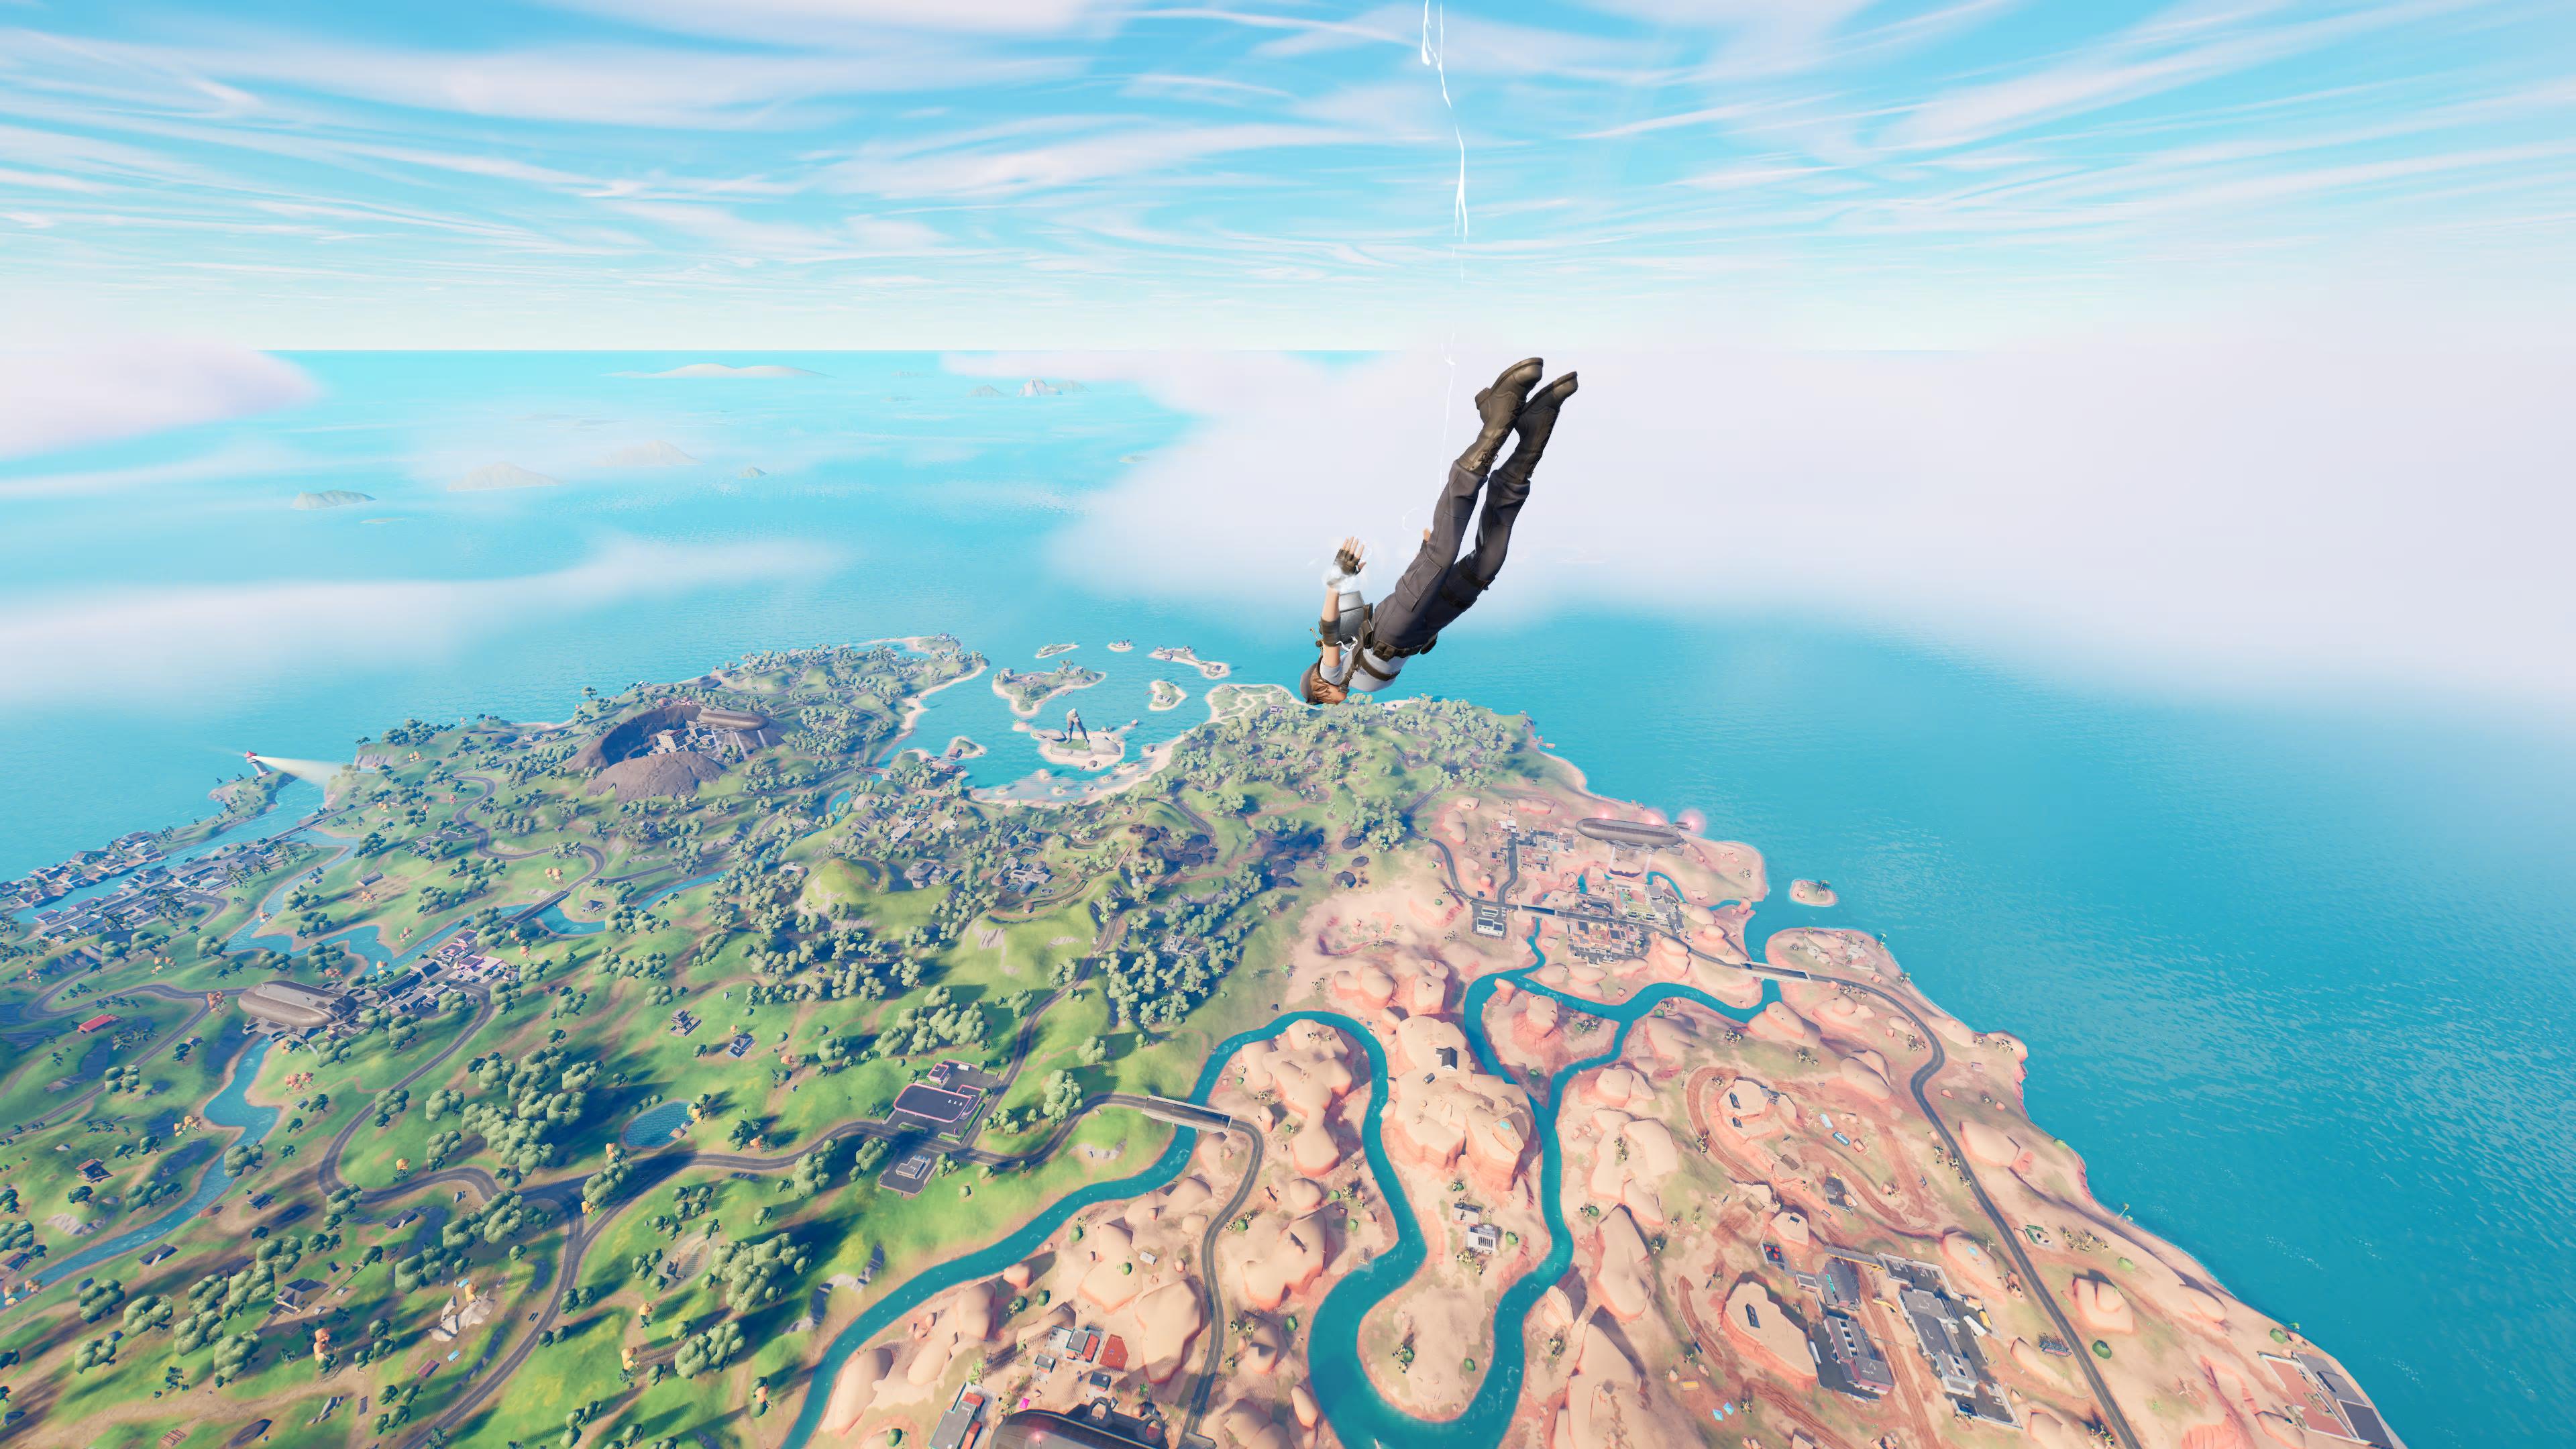 How To Play Fortnite On Chromebook In 2022 [Step-By-Step Guide] -  BrightChamps Blog